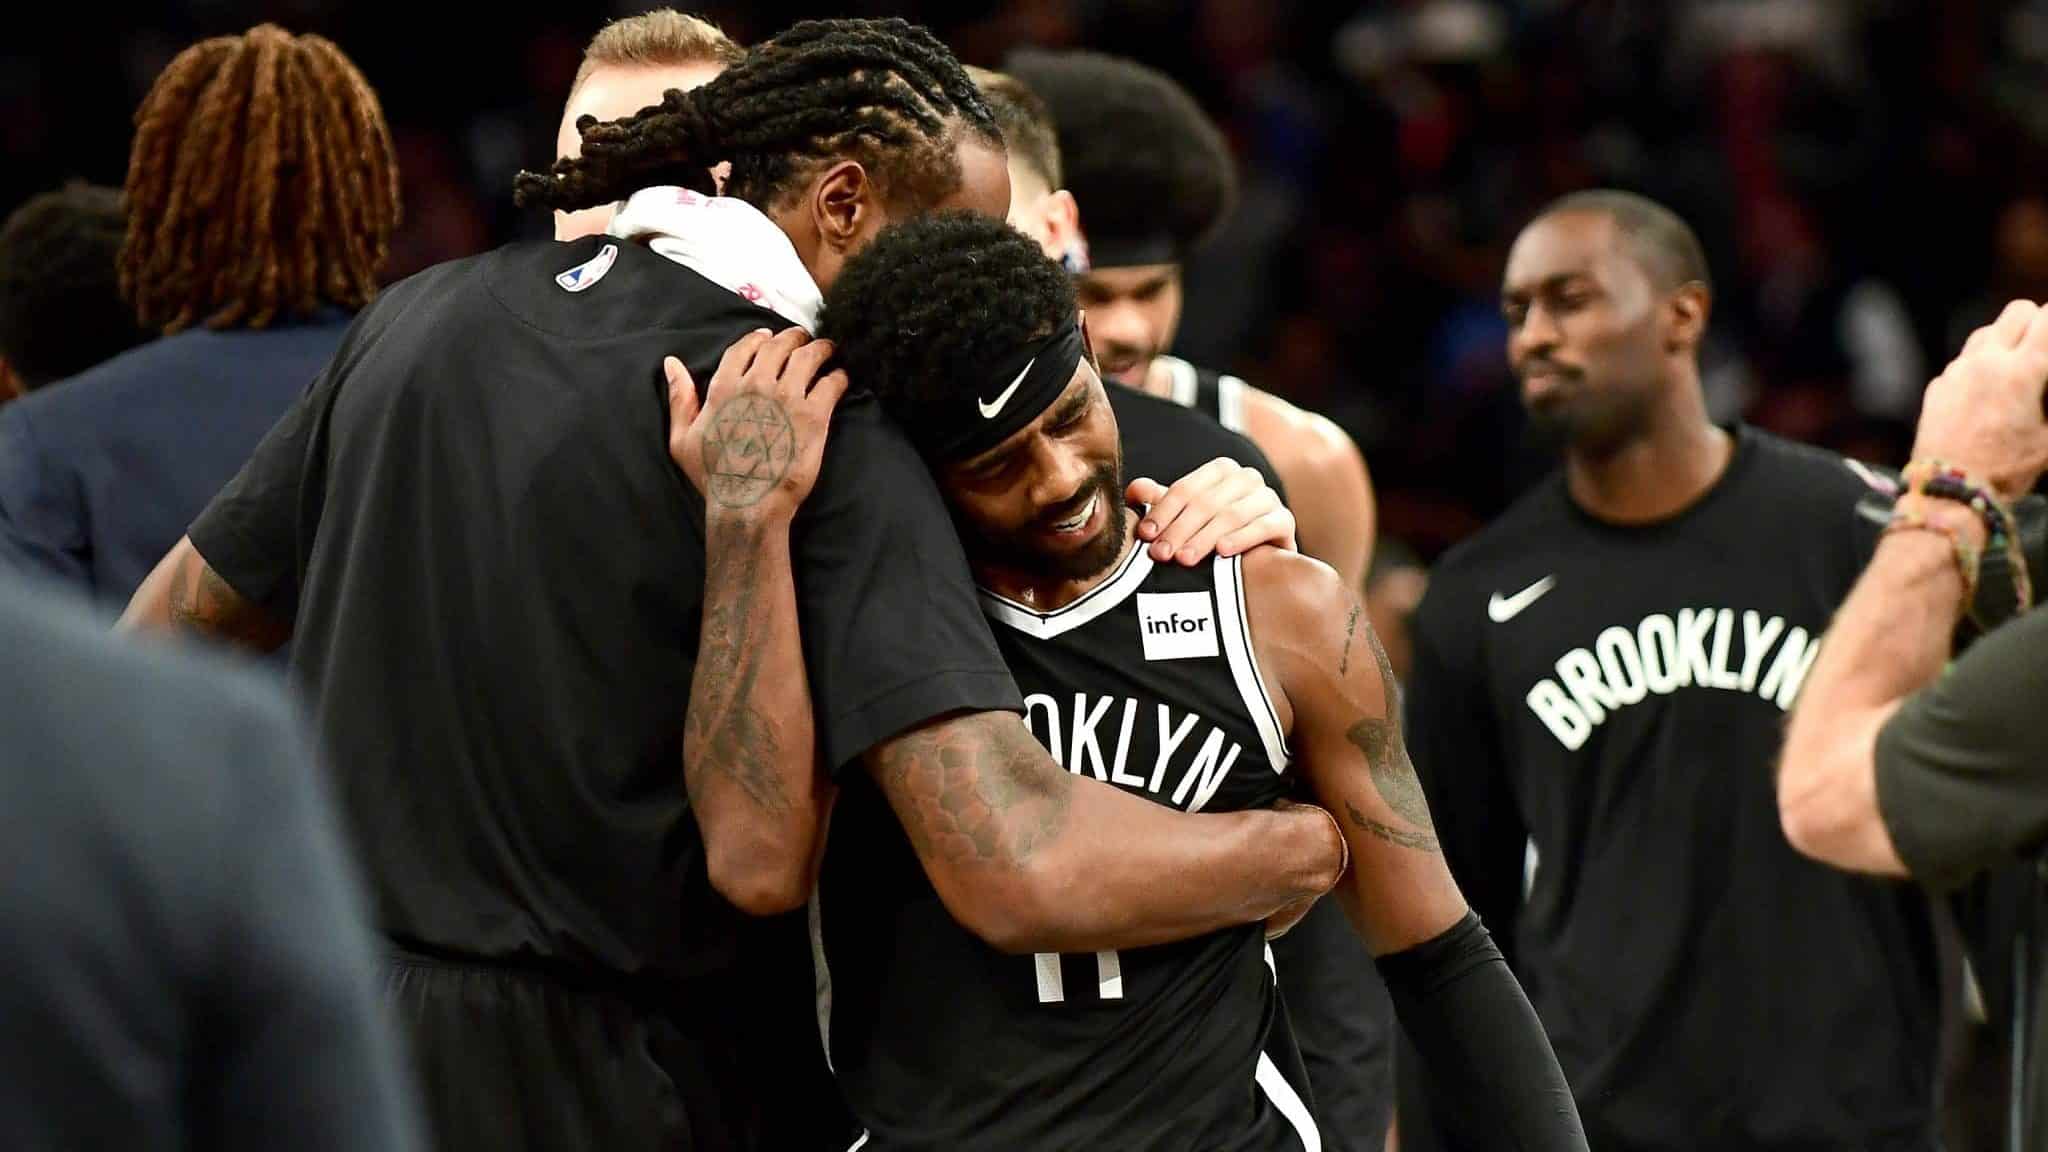 NEW YORK, NEW YORK - OCTOBER 23: DeAndre Jordan #6 hugs Kyrie Irving #11 of the Brooklyn Nets after their 127-126 loss to the Minnesota Timberwolves at Barclays Center on October 23, 2019 in the Brooklyn borough of New York City. NOTE TO USER: User expressly acknowledges and agrees that, by downloading and or using this photograph, User is consenting to the terms and conditions of the Getty Images License Agreement.